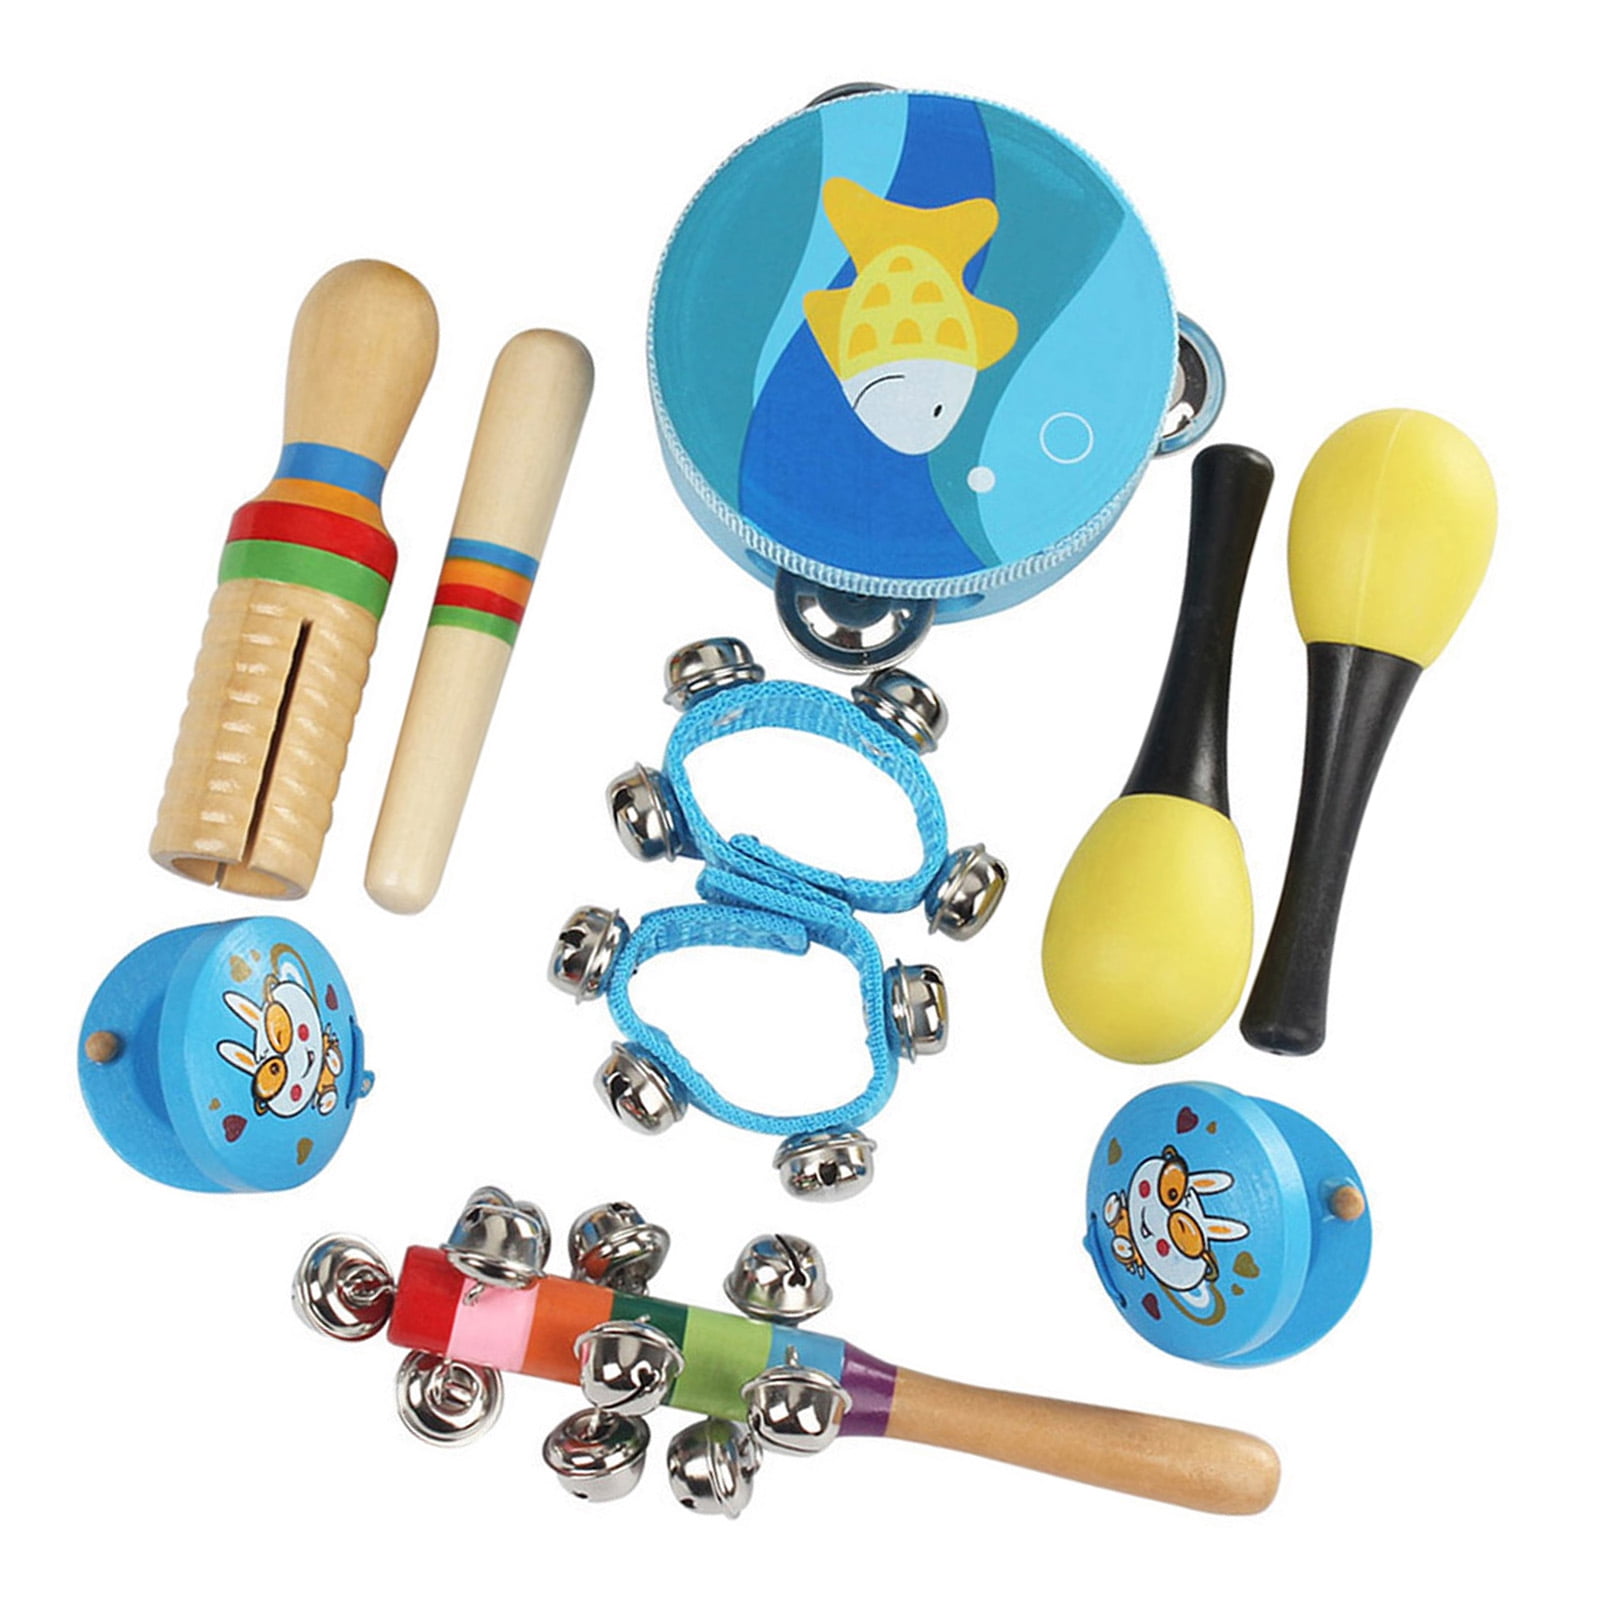 Walmeck 10pcs/Set Musical Toys Percussion Instruments Band Rhythm Kit Including Tambourine Maracas Castanets Handbells Wooden Guiro for Kids Children Toddlers